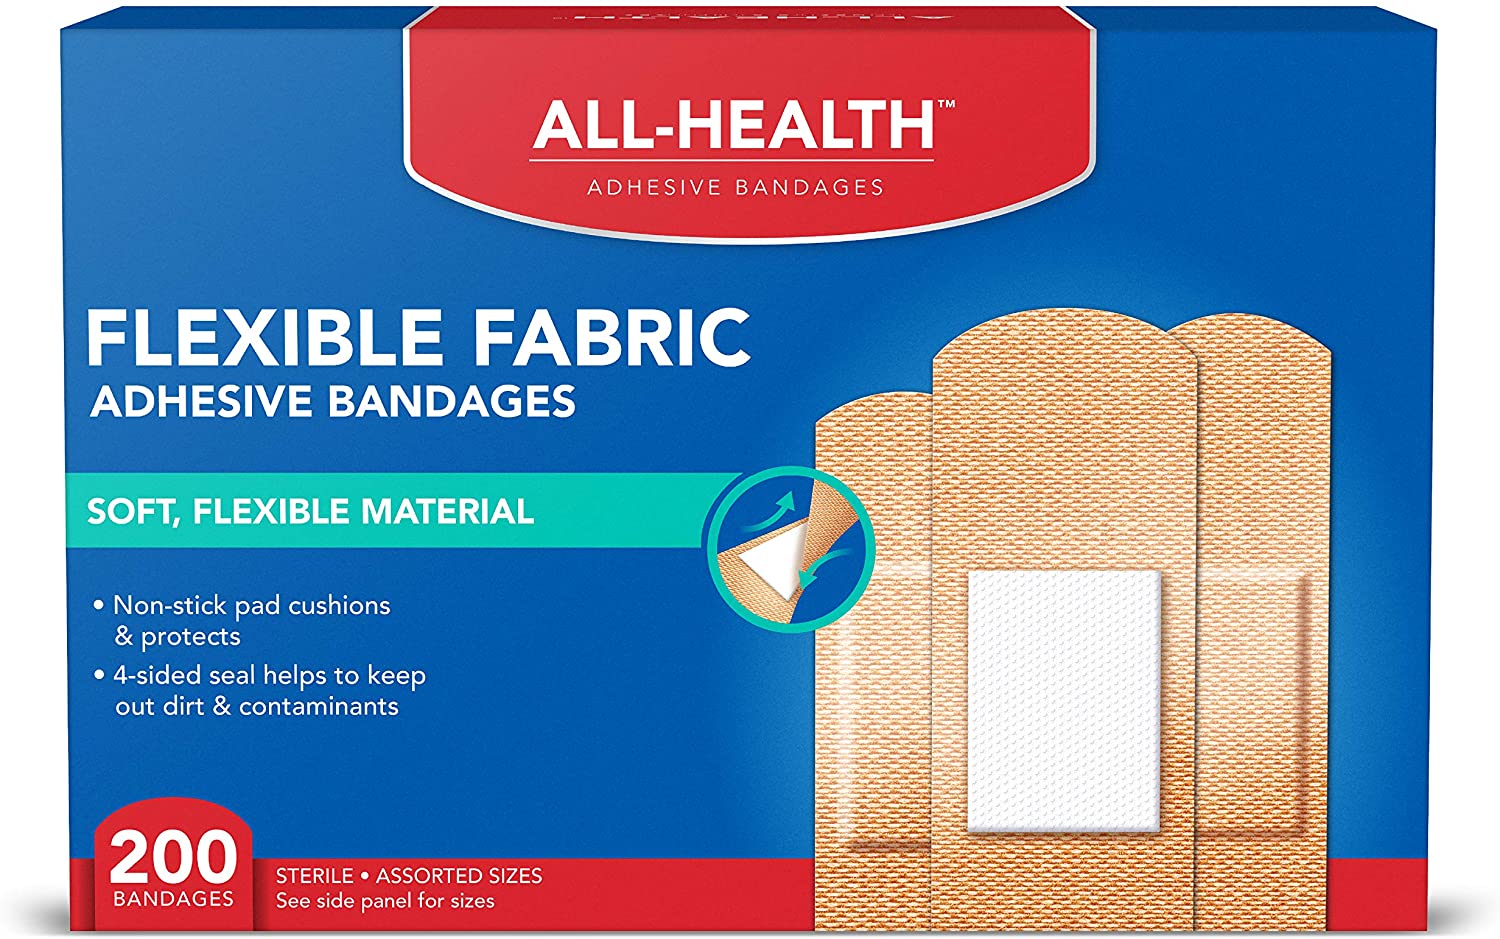 All Health Flexible Fabric Adhesive Bandages, Assorted Sizes Variety Pack, 200 ct | Flexible Protection for First Aid and Wound Care